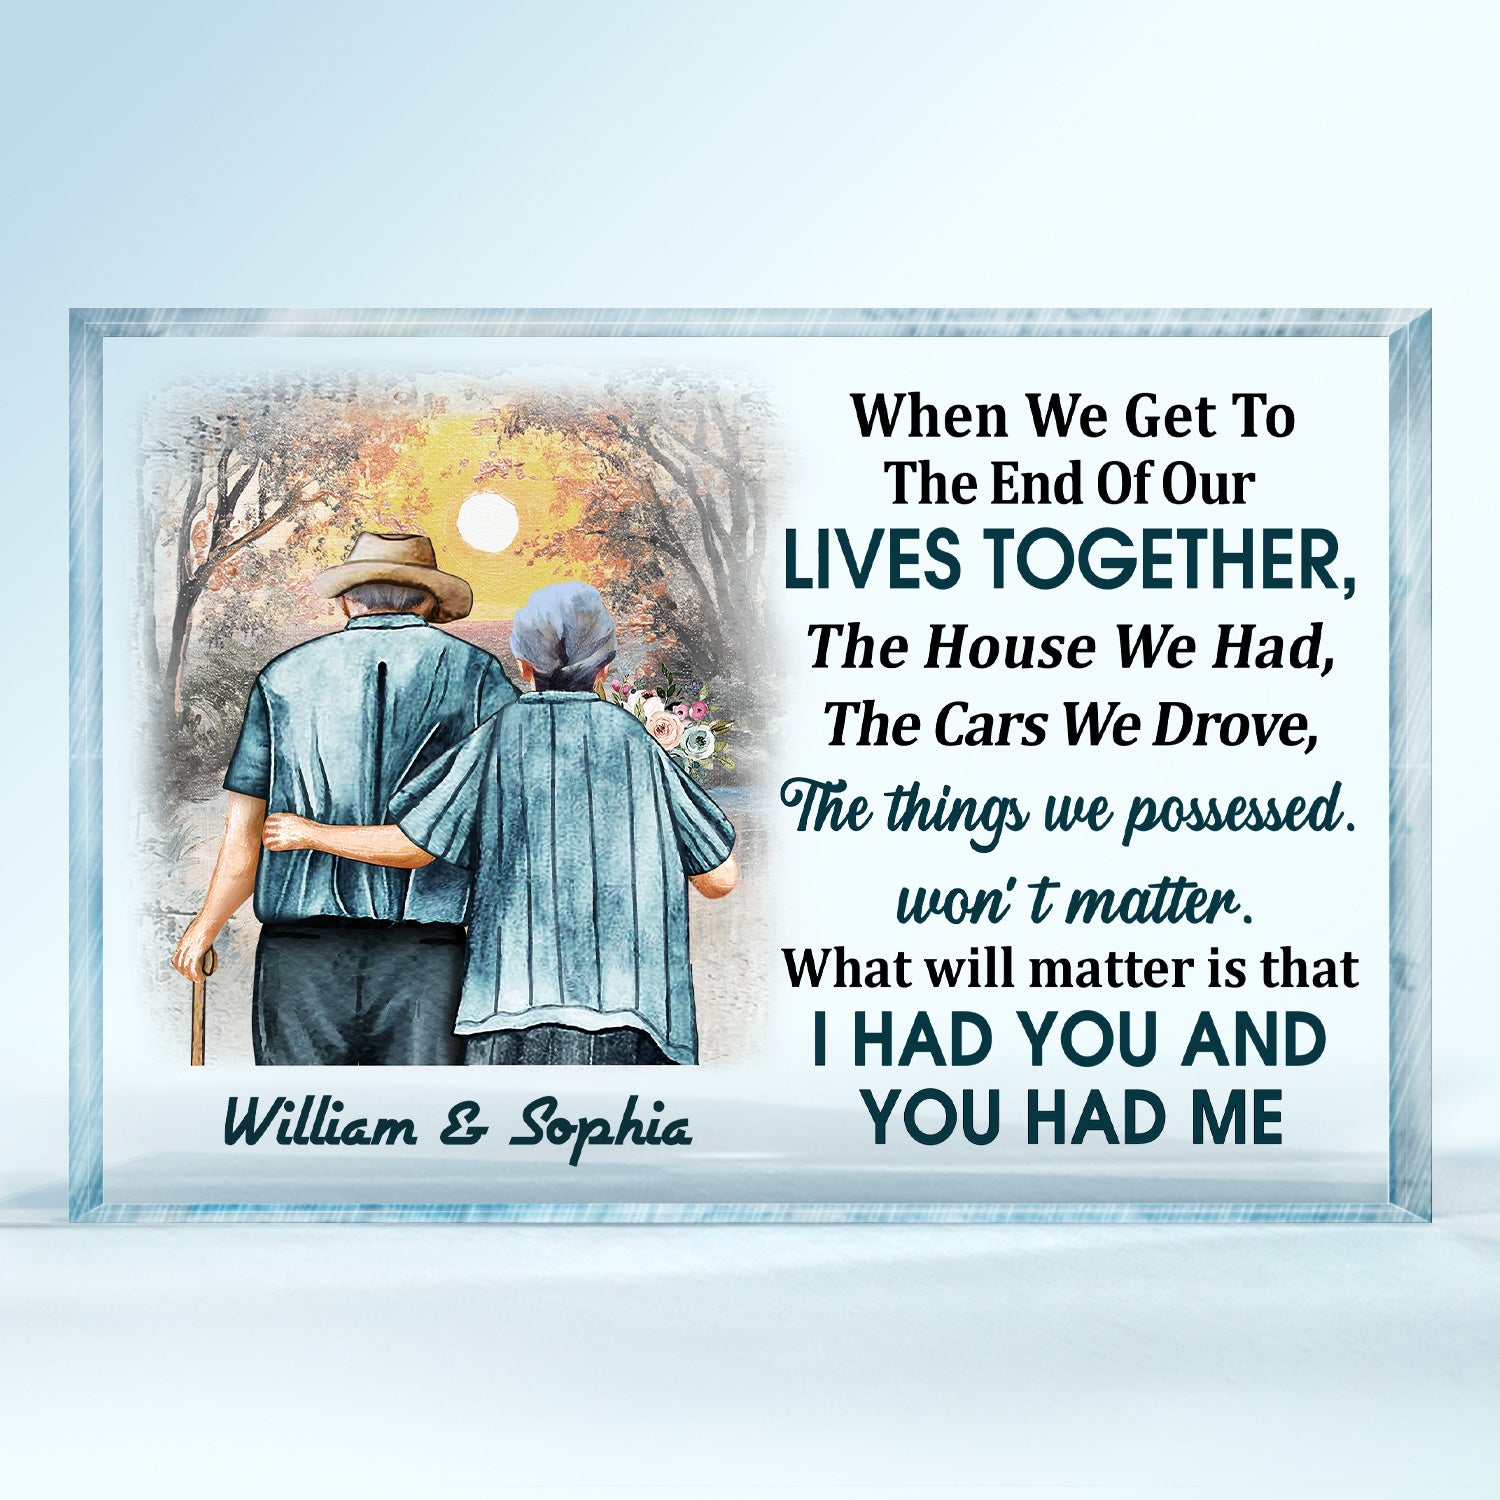 When We Get To The End Of Our Lives Together Old Couple - Anniversary, Memorial, Loving Gift For Husband, Wife, Family - Personalized Rectangle Shaped Acrylic Plaque